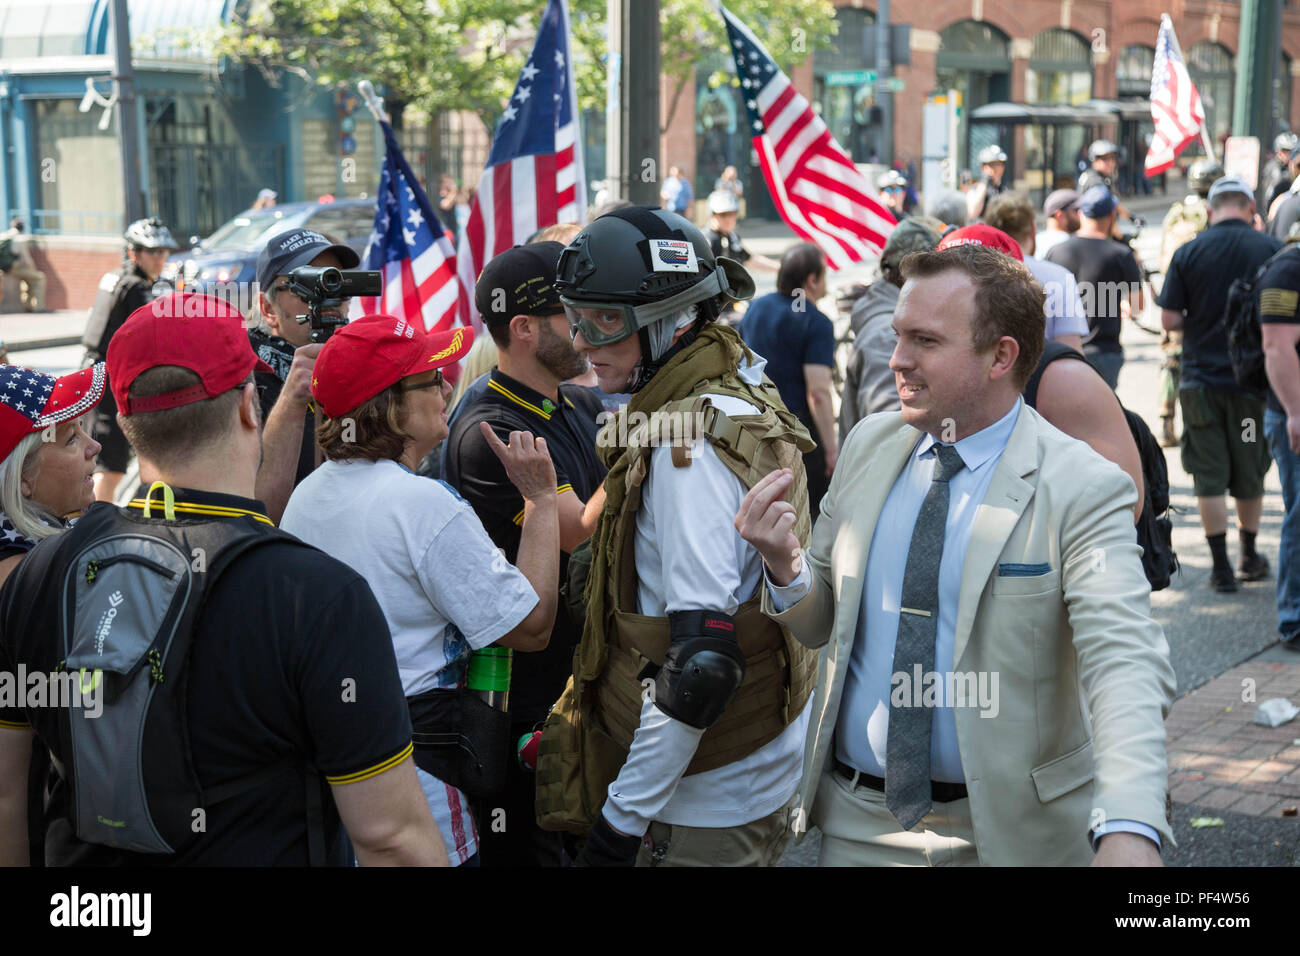 Seattle, WA, USA.  18th August, 2018. A counterprotester Chase, tries to have a dialog with pro gun supporters during a rally  near the King County Court building.  Credit: Maria S./Alamy Live News. Stock Photo